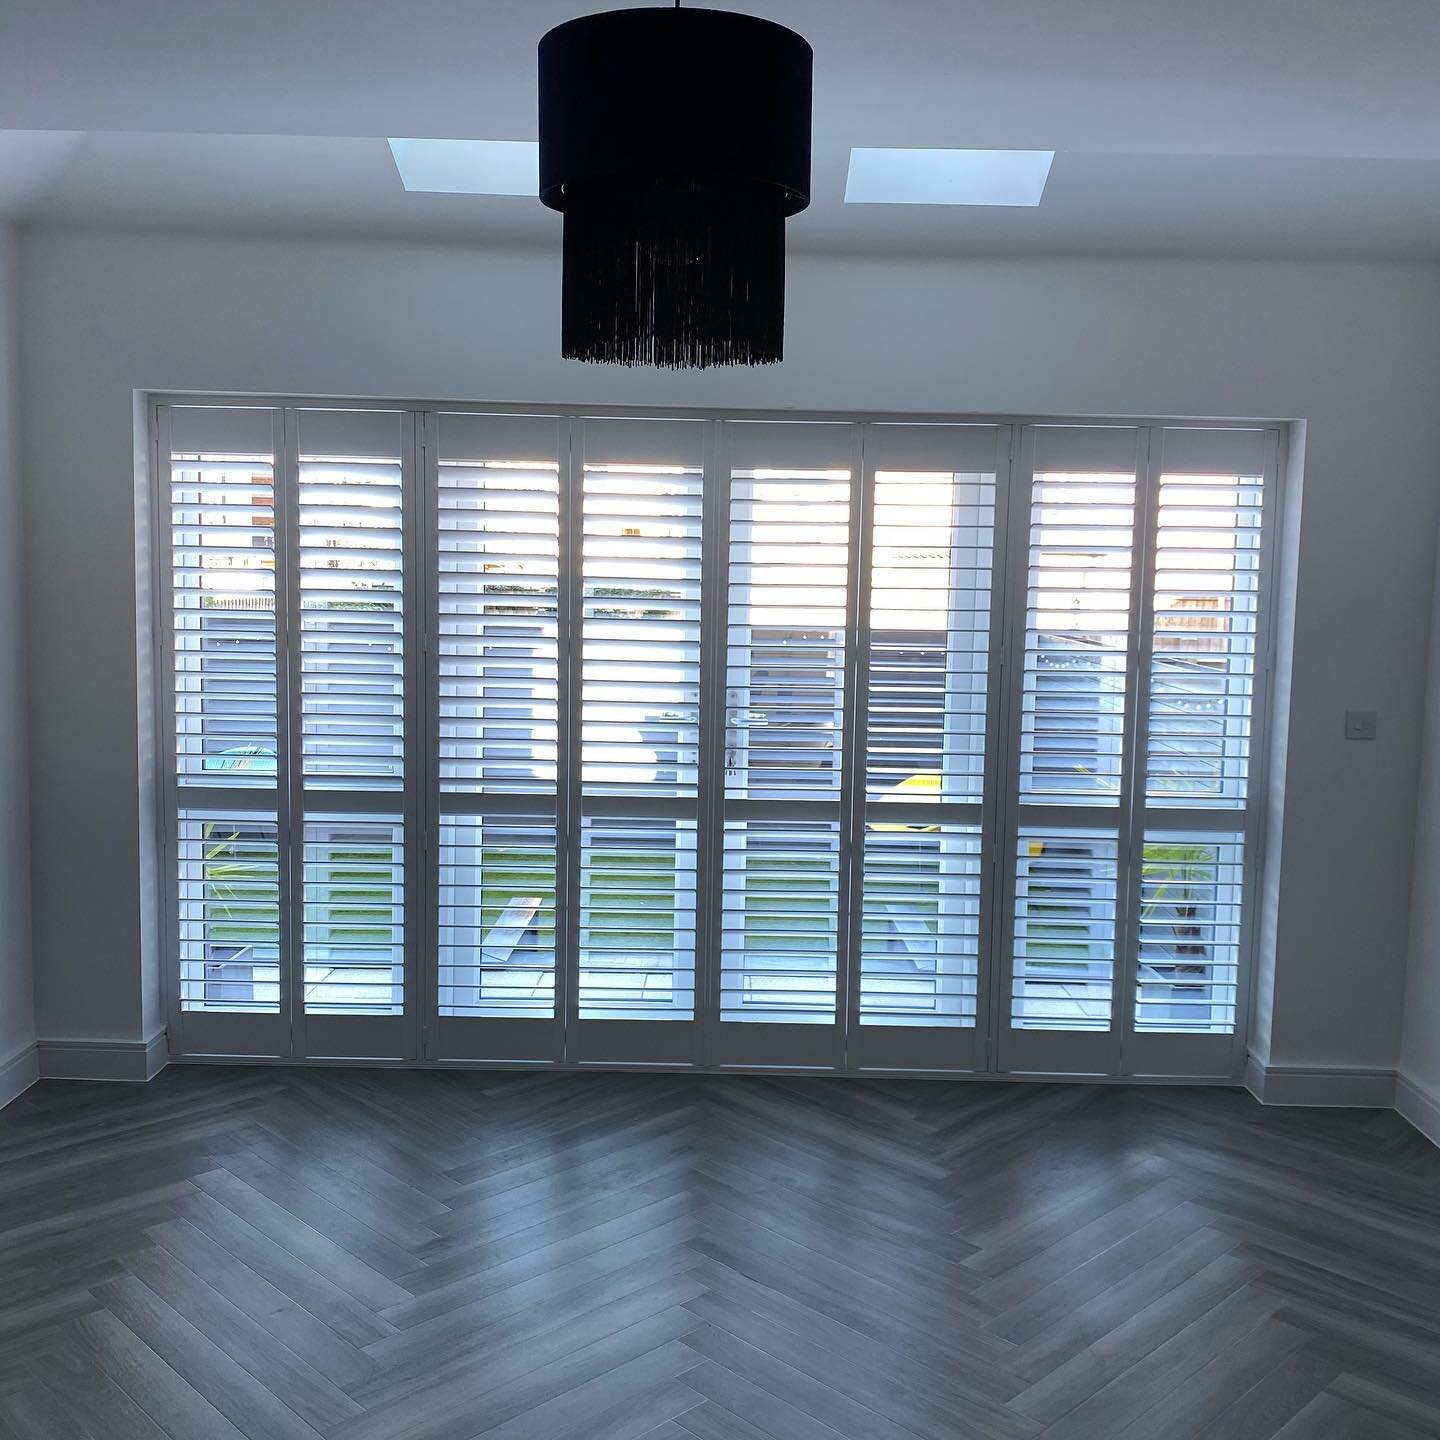 We have a few appointments left for this week. So get in touch for a free no obligation quote!! #platationshutters #noobligation #quote #homedecor #homeimprovement